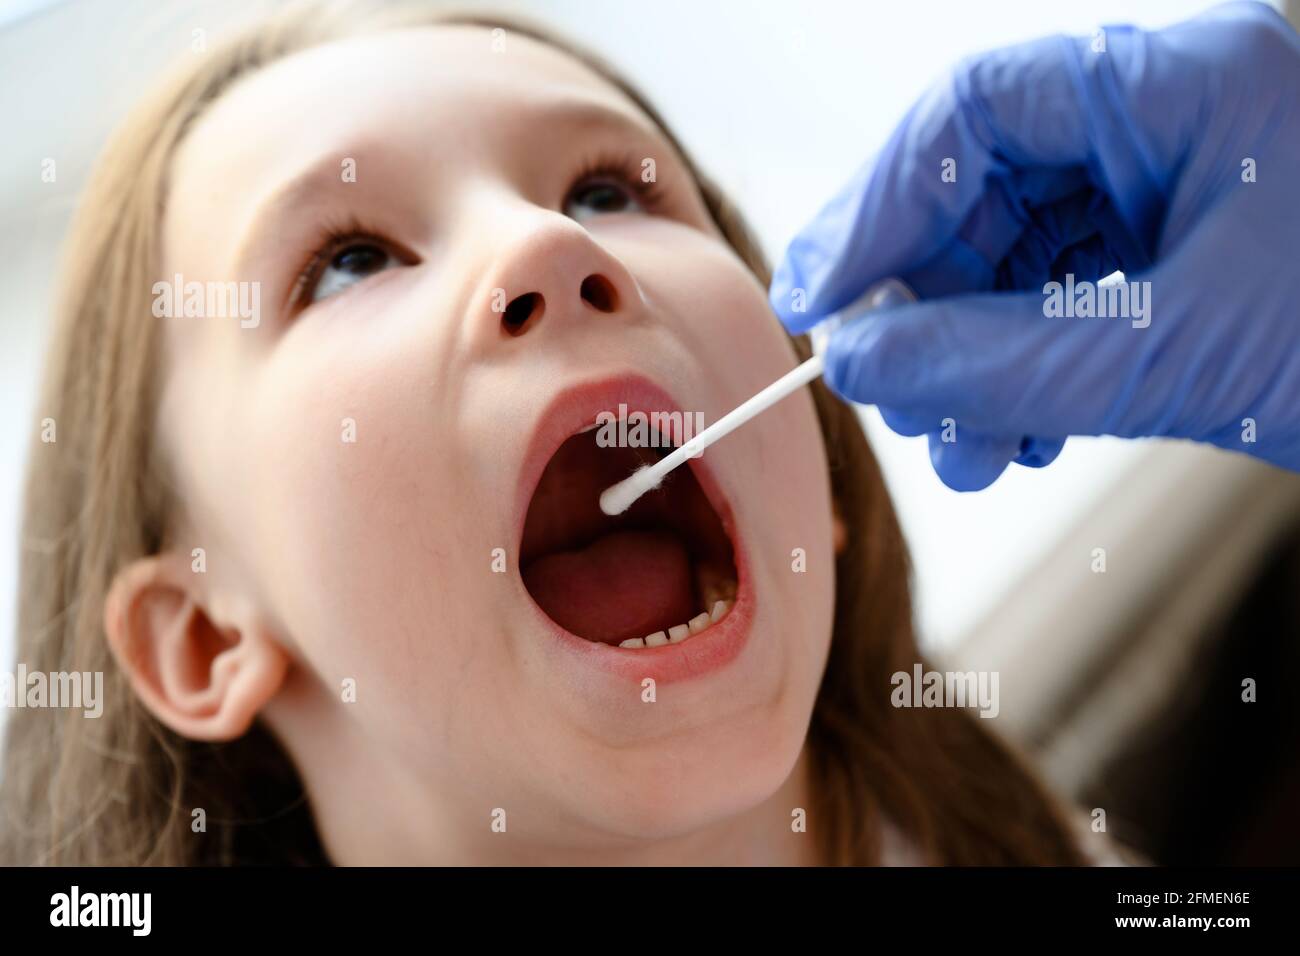 Kid opens mouth for COVID-19 test, doctor holds swab for saliva sample from cute child during coronavirus pandemic. Nurse hand and little girl face cl Stock Photo